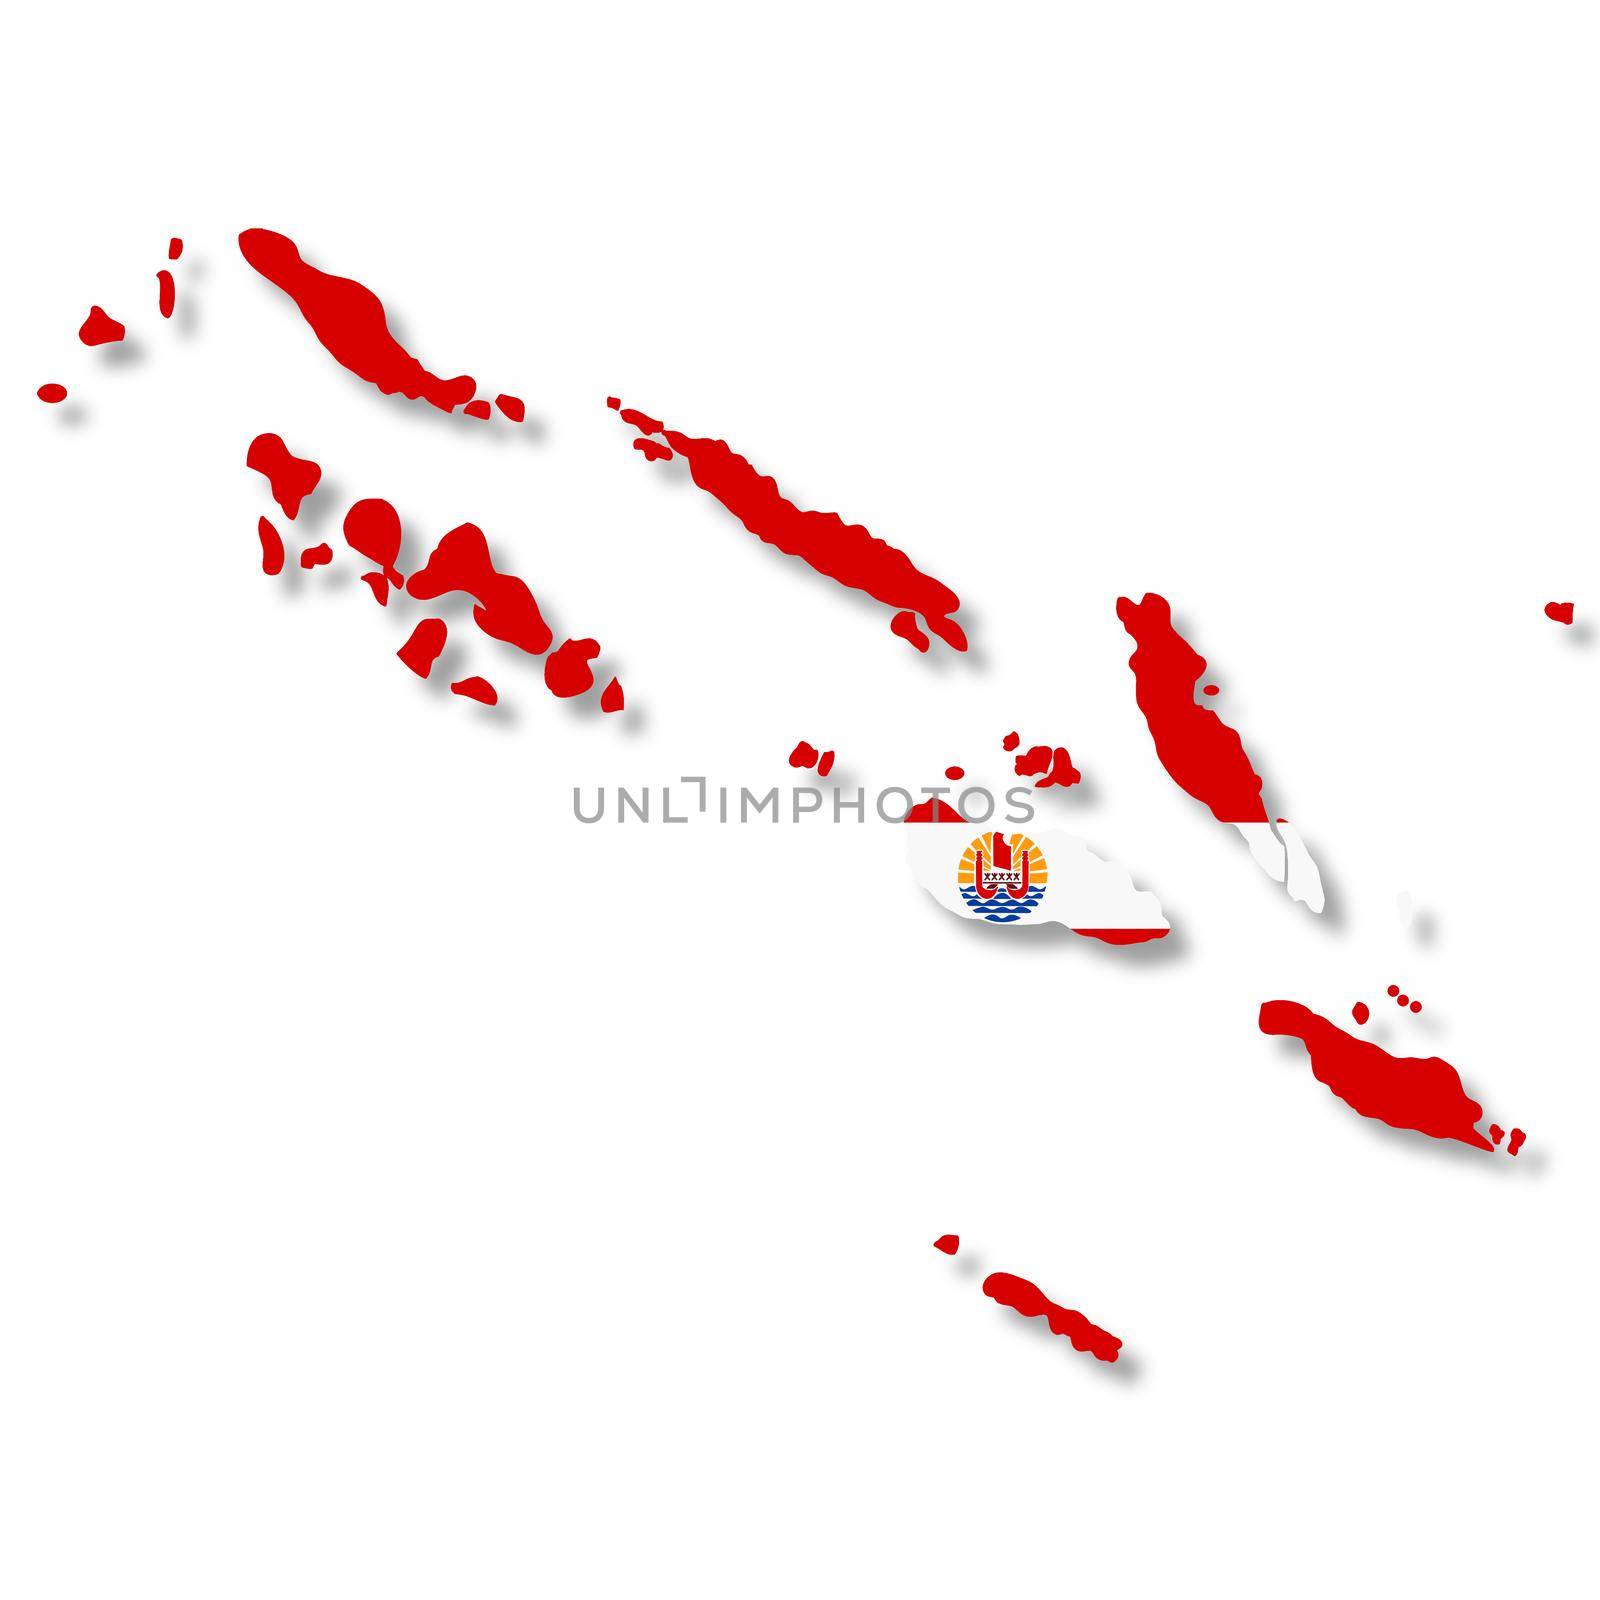 A French Polynesia map on white background with clipping path to remove shadow 3d illustration